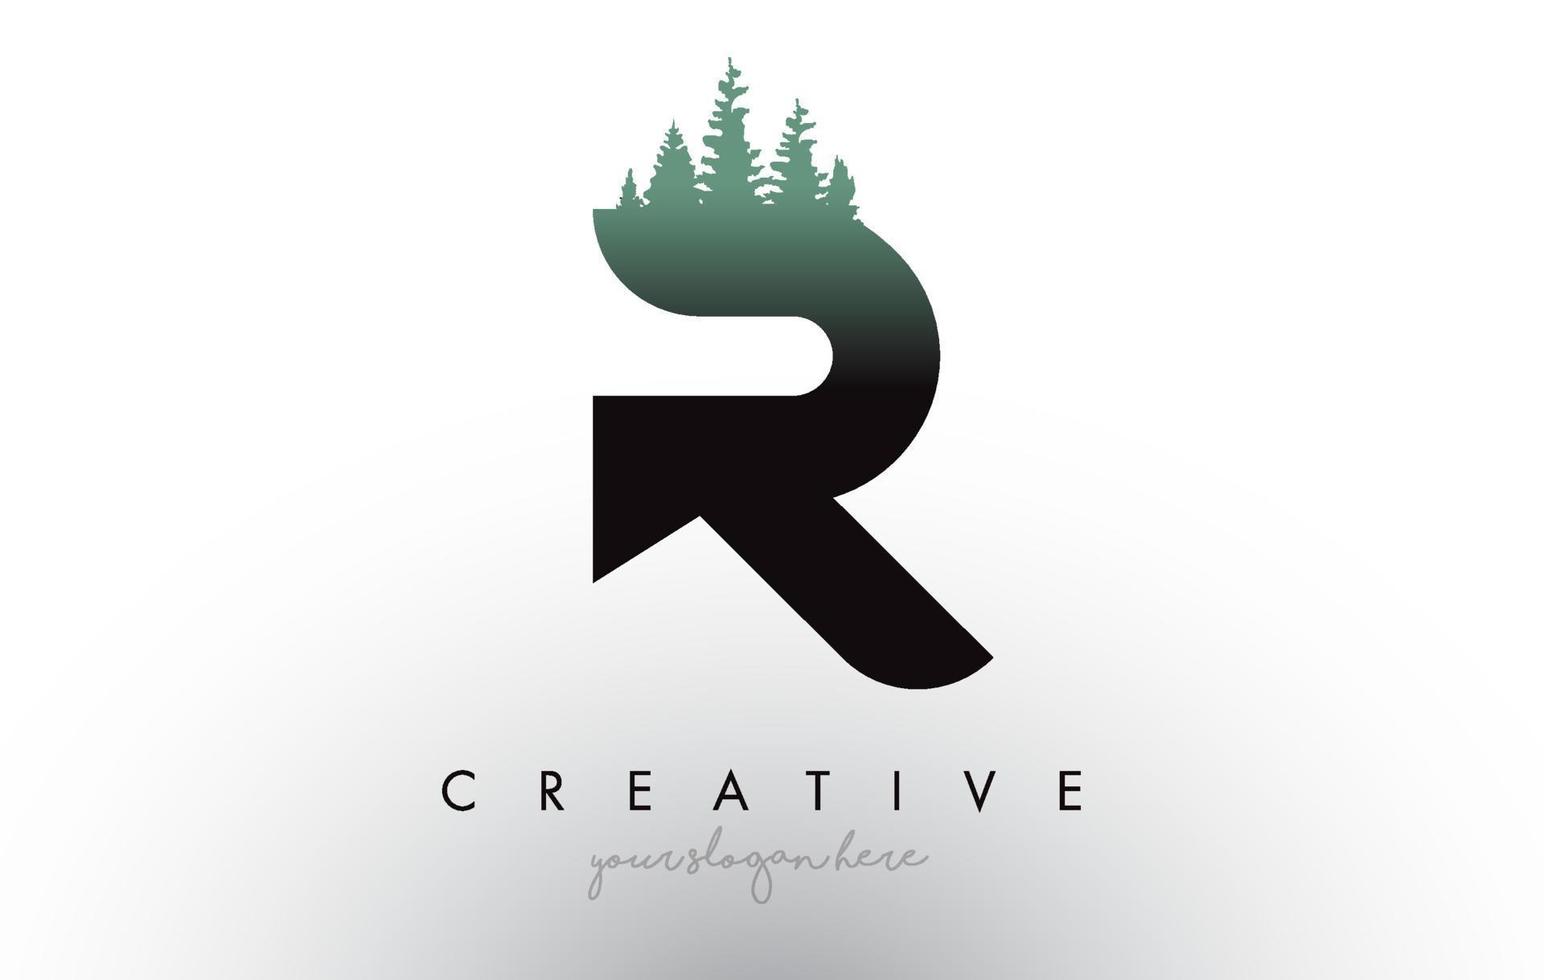 Creative R Letter Logo Idea With Pine Forest Trees. Letter R Design With Pine Tree on Top vector